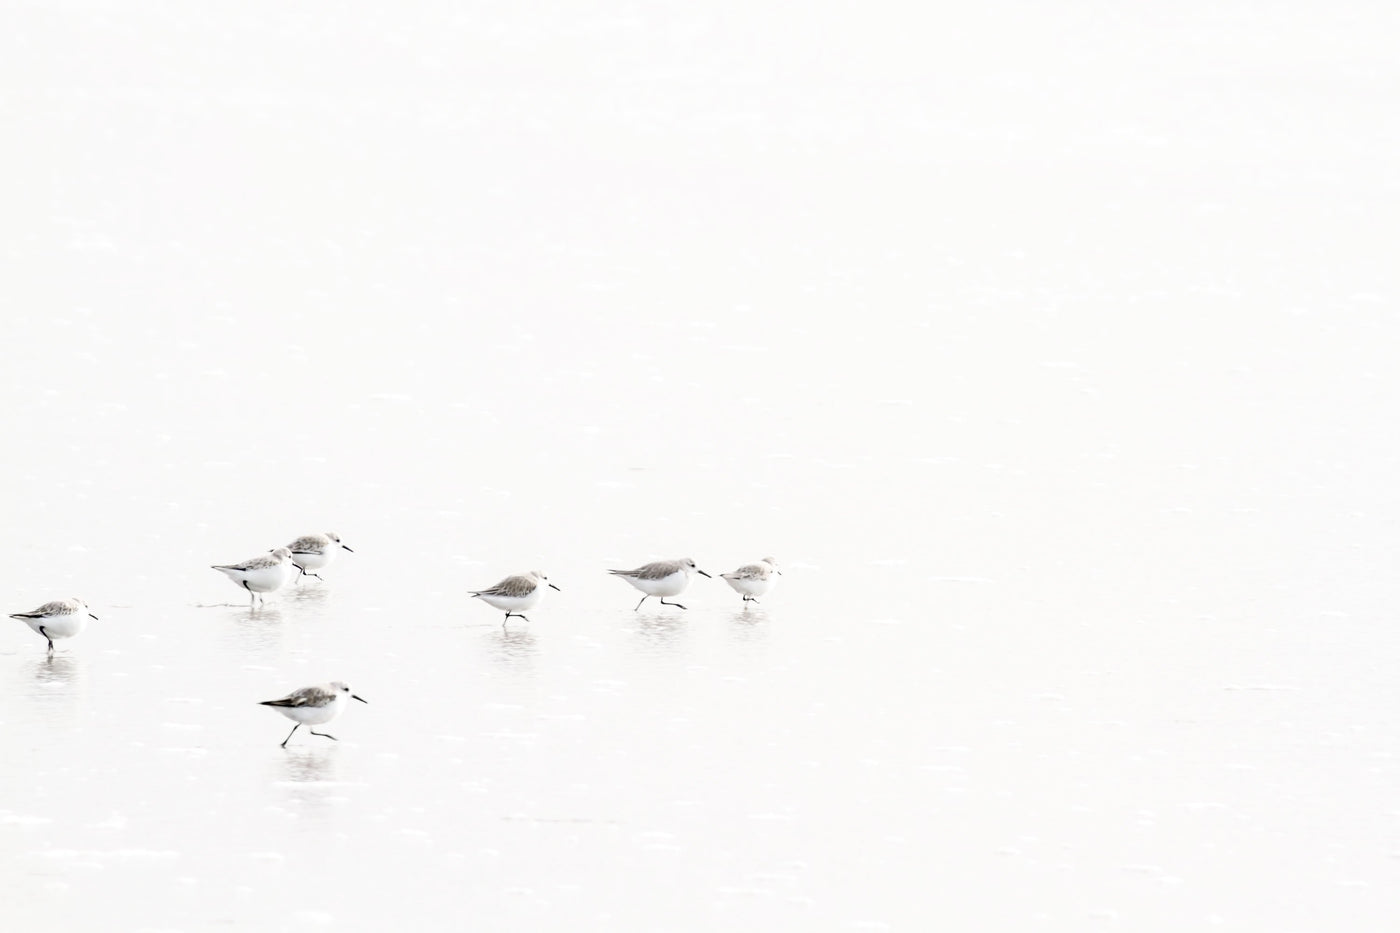 Sandpipers No 5 - Coastal bird wall art by Cattie Coyle Photography